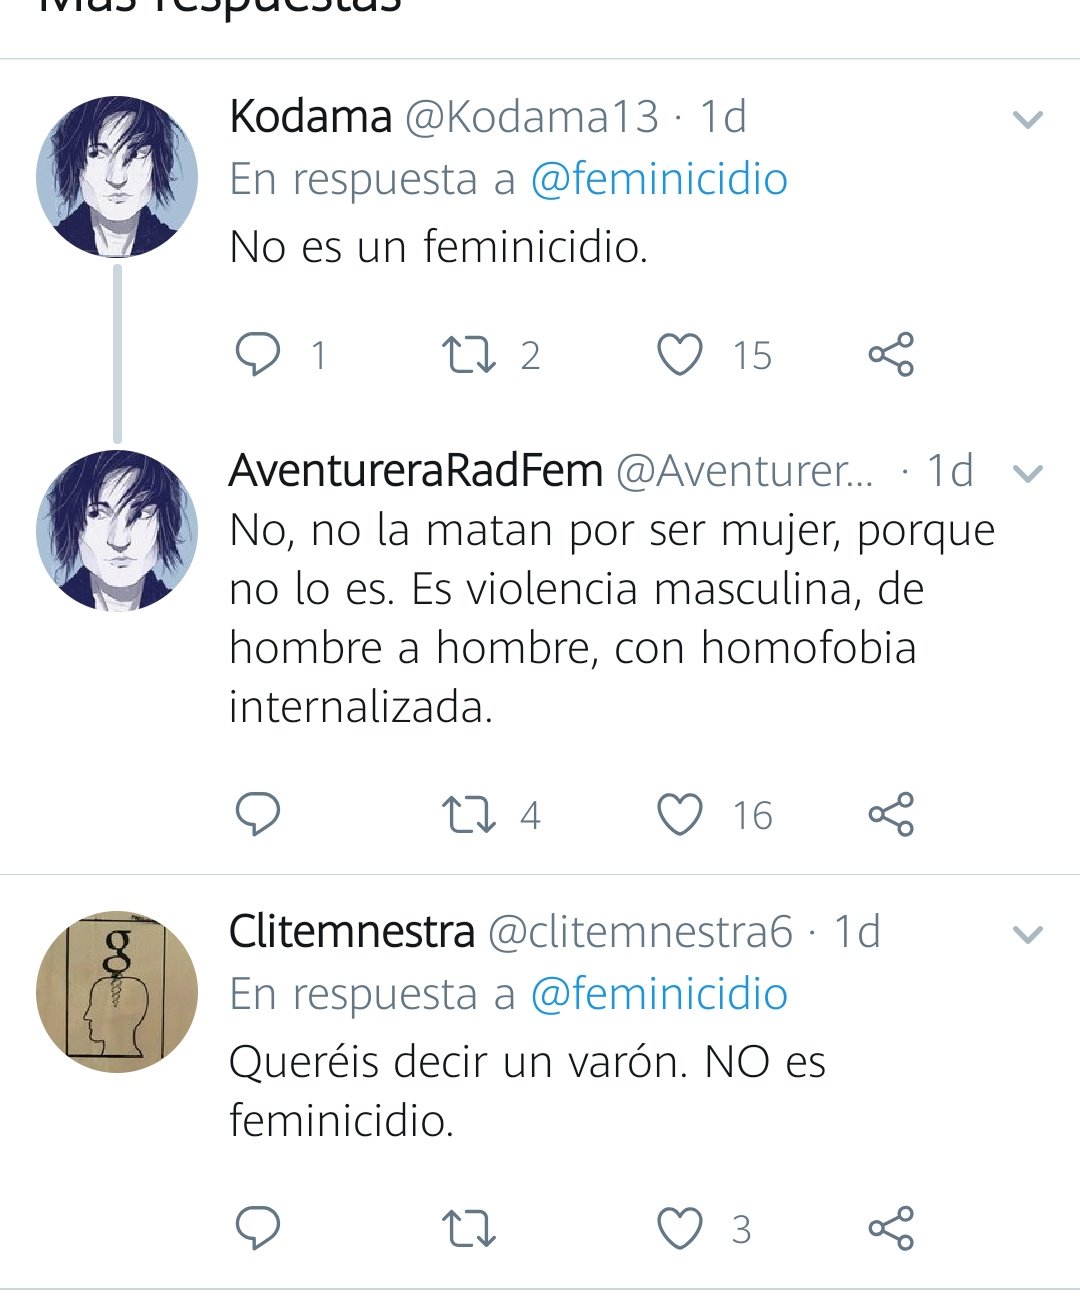 Twitter es oscuro y alberga horrores